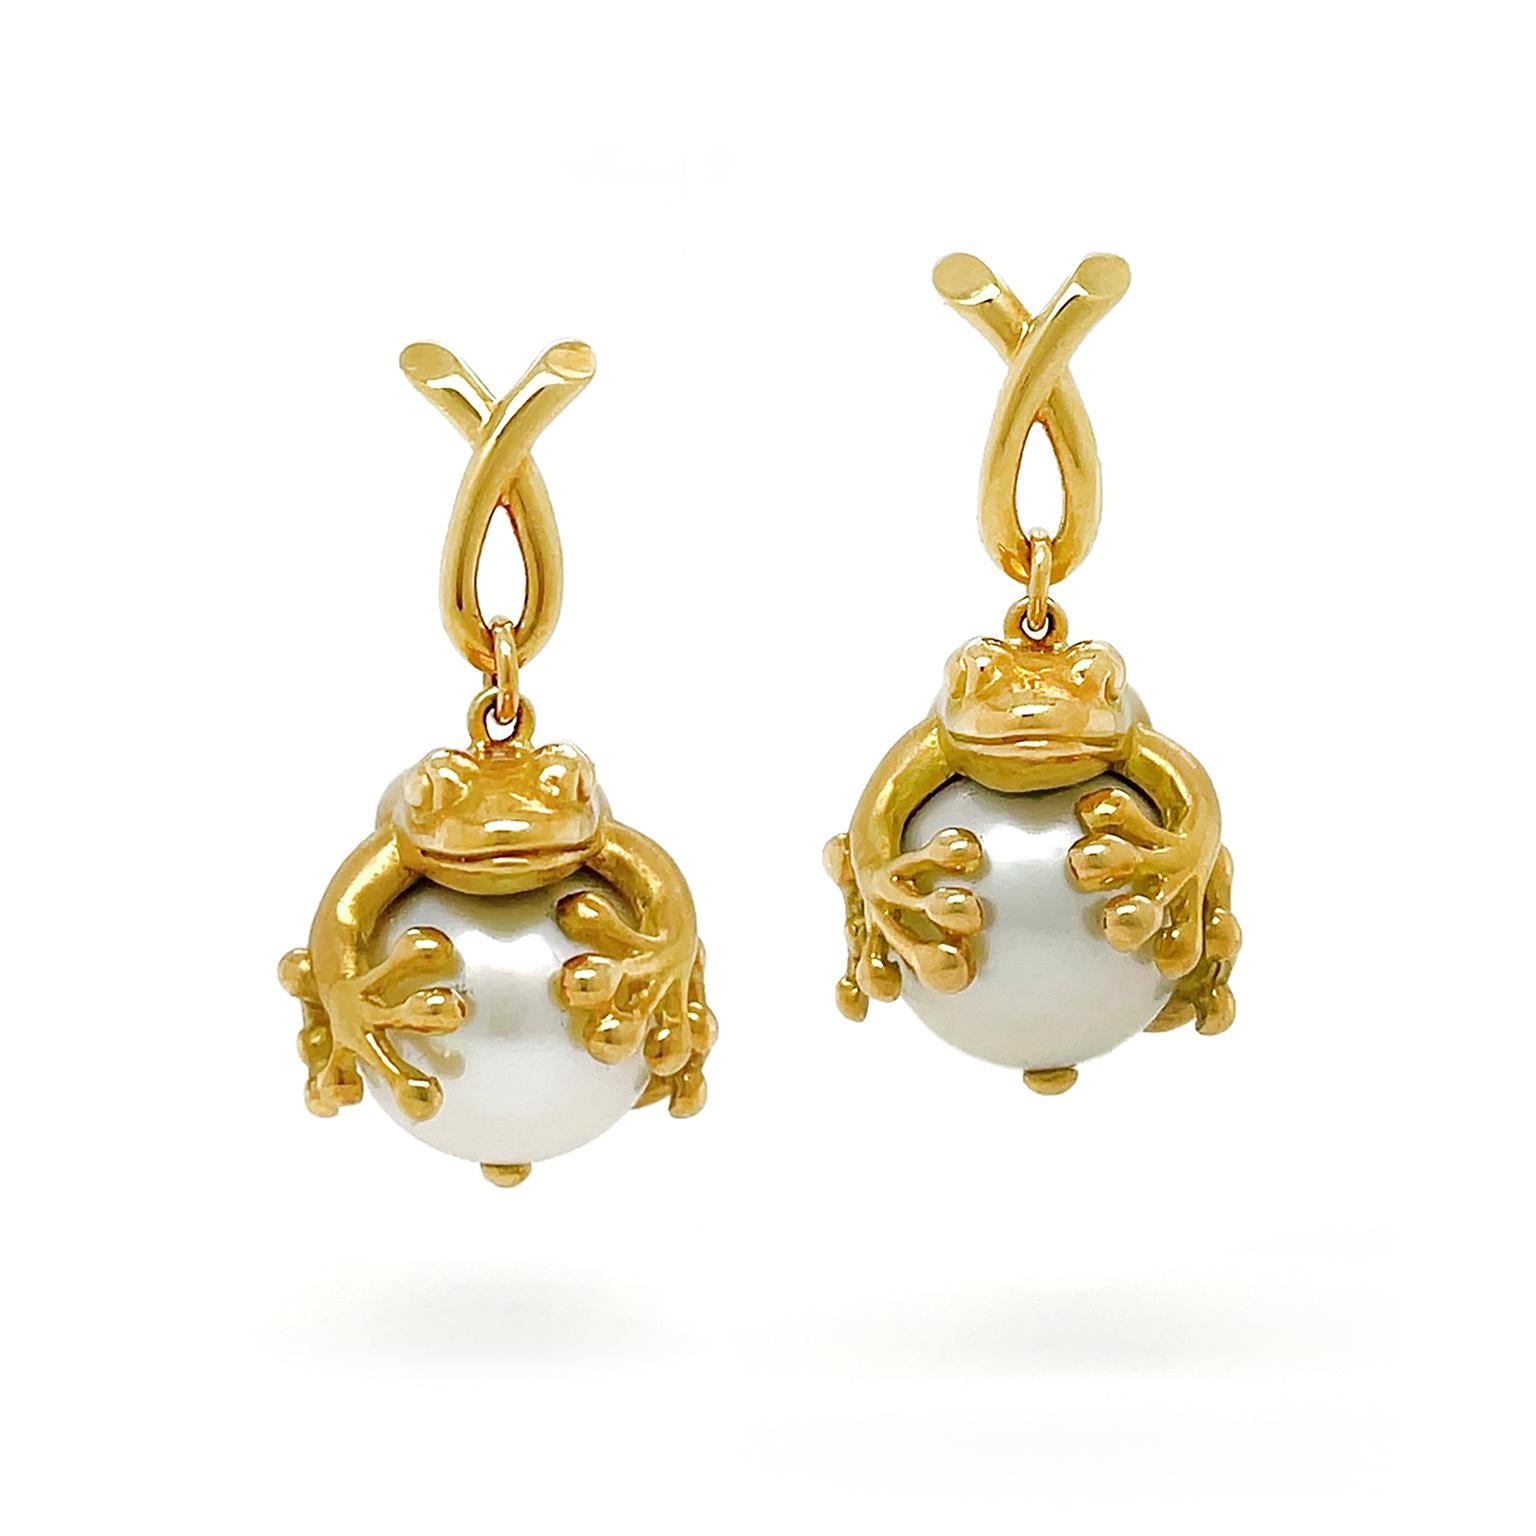 Valentin Magro Frog Grabbing a South Sea Pearl Earrings add whimsy tot he design. Both animals suspend from 18k yellow gold crossover loops. Rather than sit on lily pads, the frogs hug white South Sea pearls. The jewels' luster hints at their high